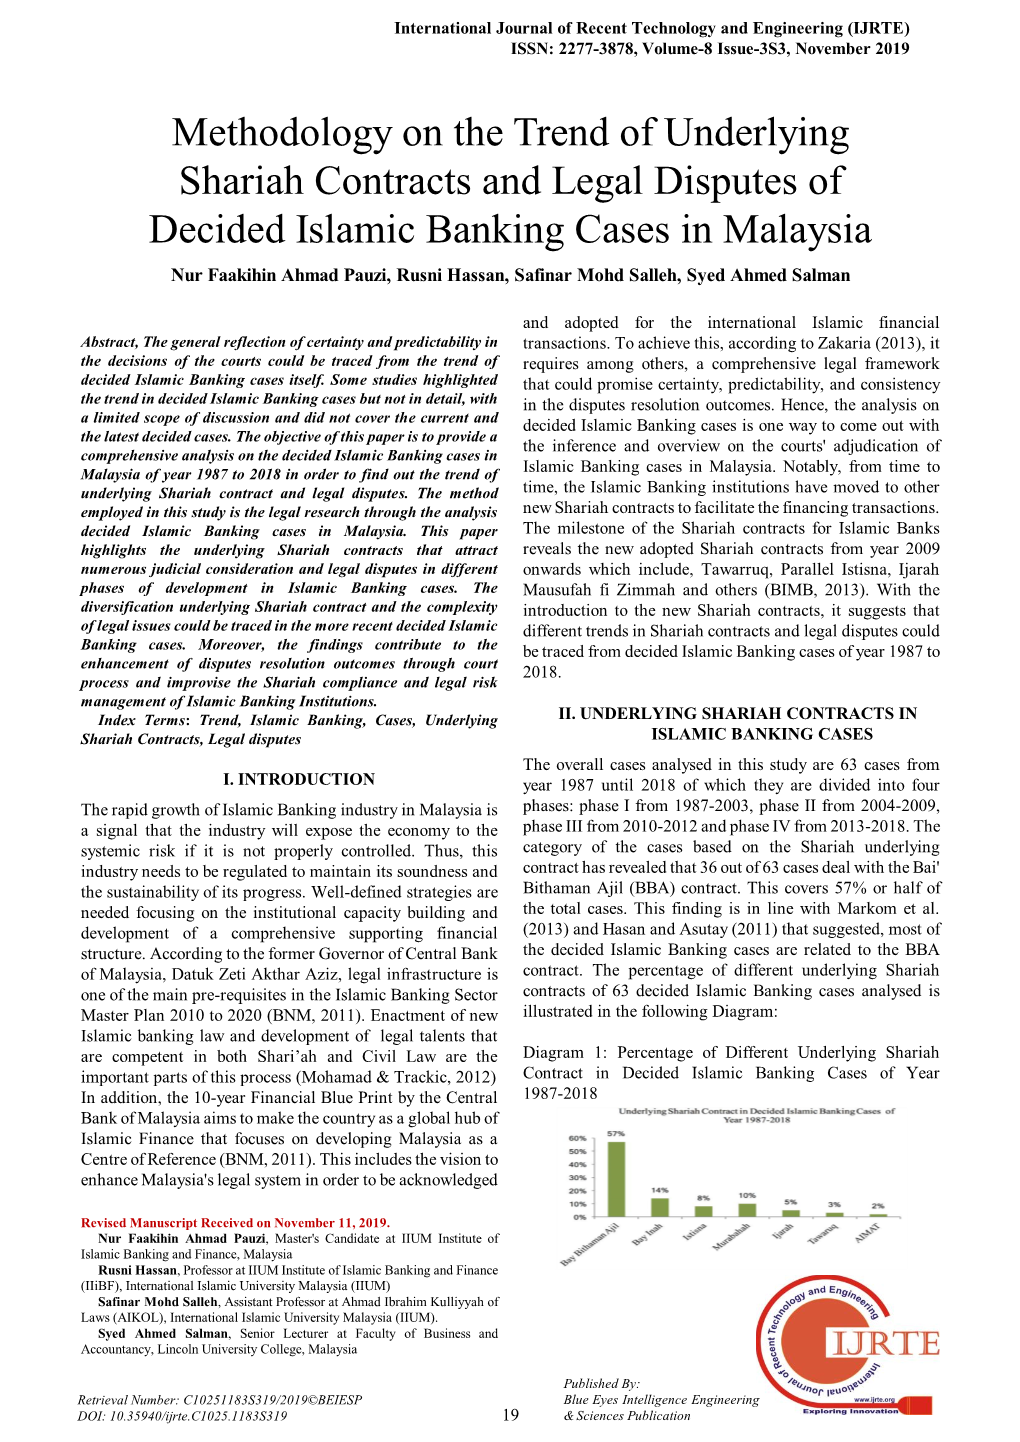 Methodology on the Trend of Underlying Shariah Contracts And